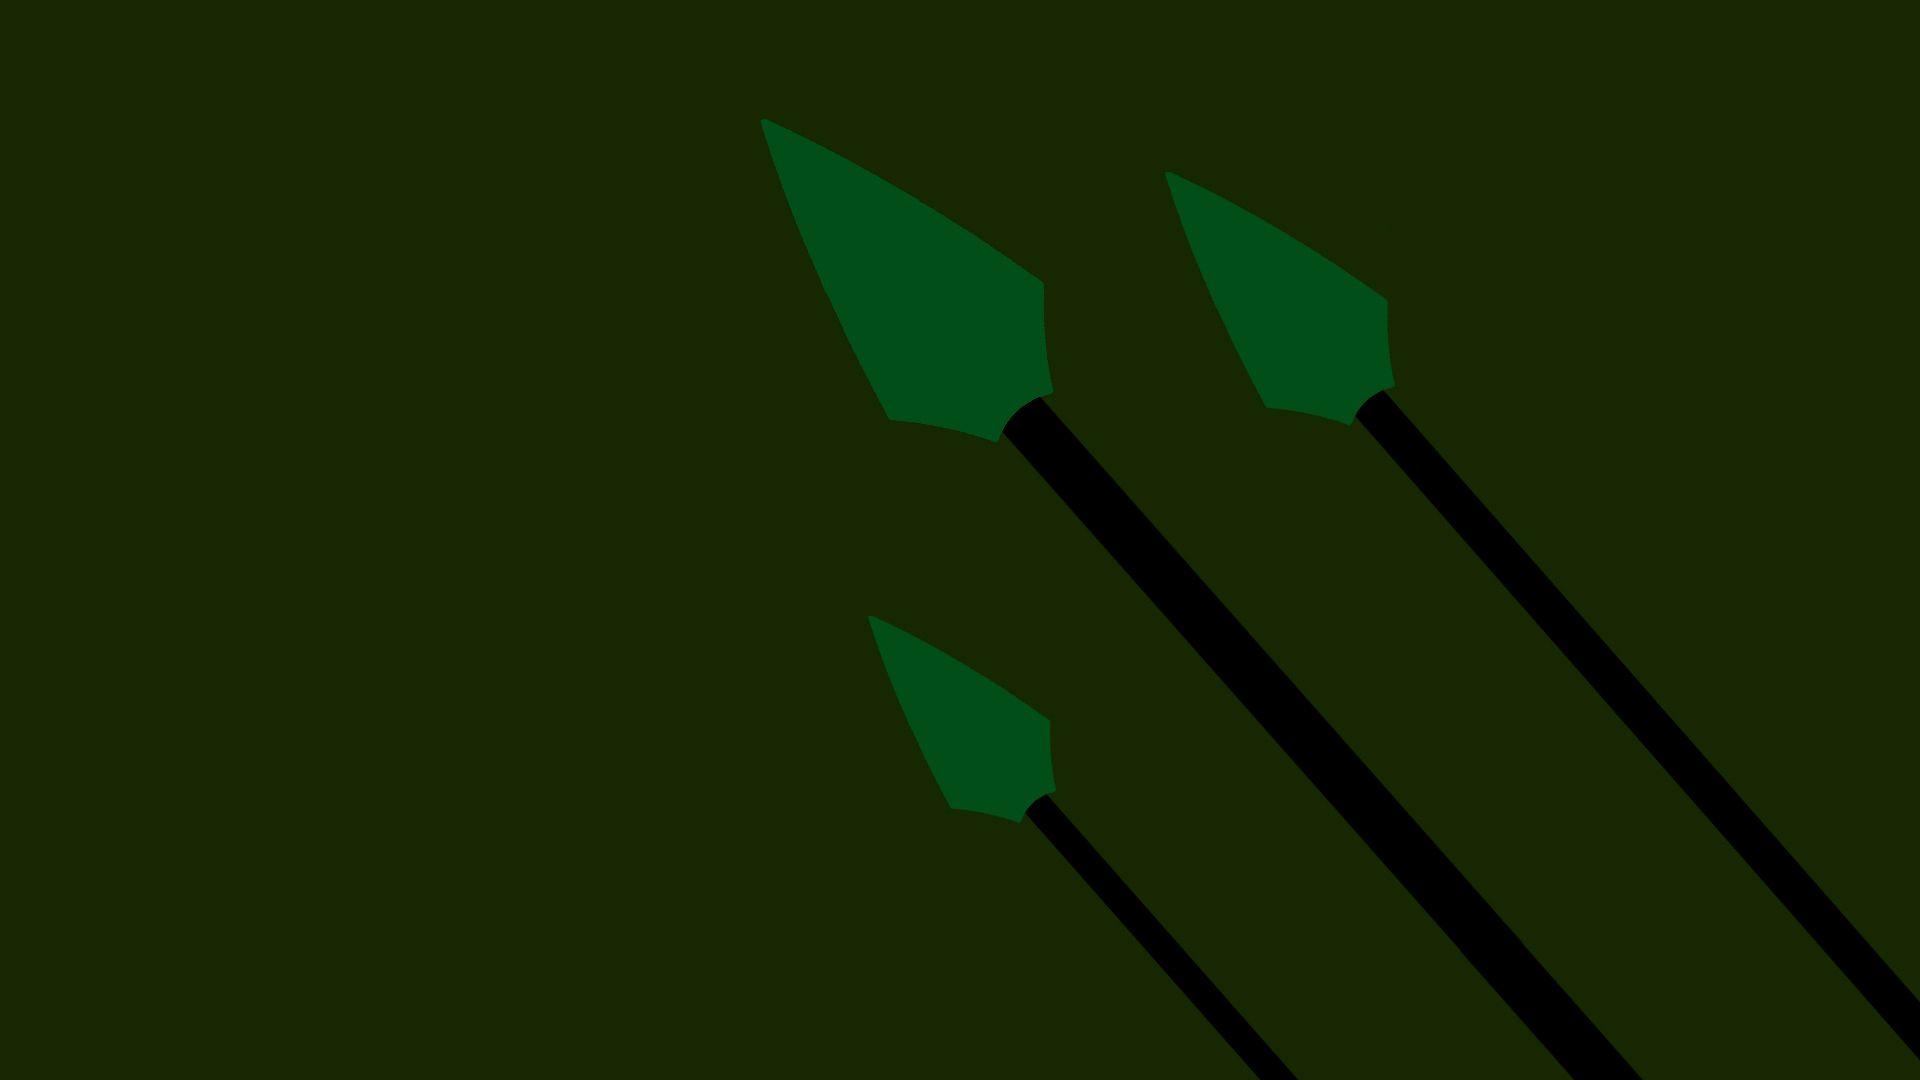 Green Arrow Wallpapers – 1920x1080 for mobile and desktop